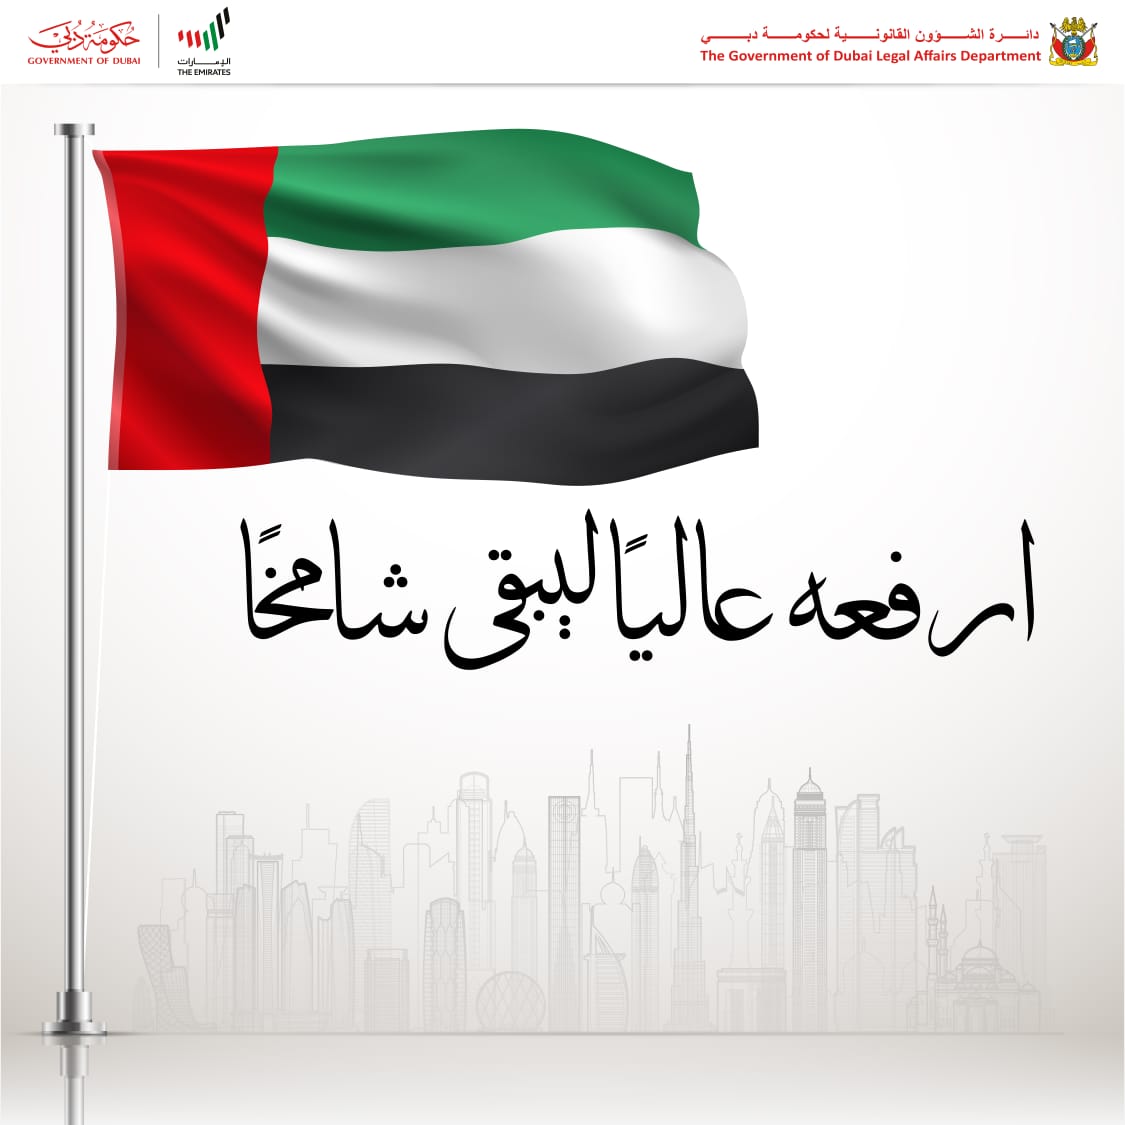 Statement of His Excellency the Director General of the Government of Dubai Legal Affairs Department on the Occasion of the UAE Flag Day